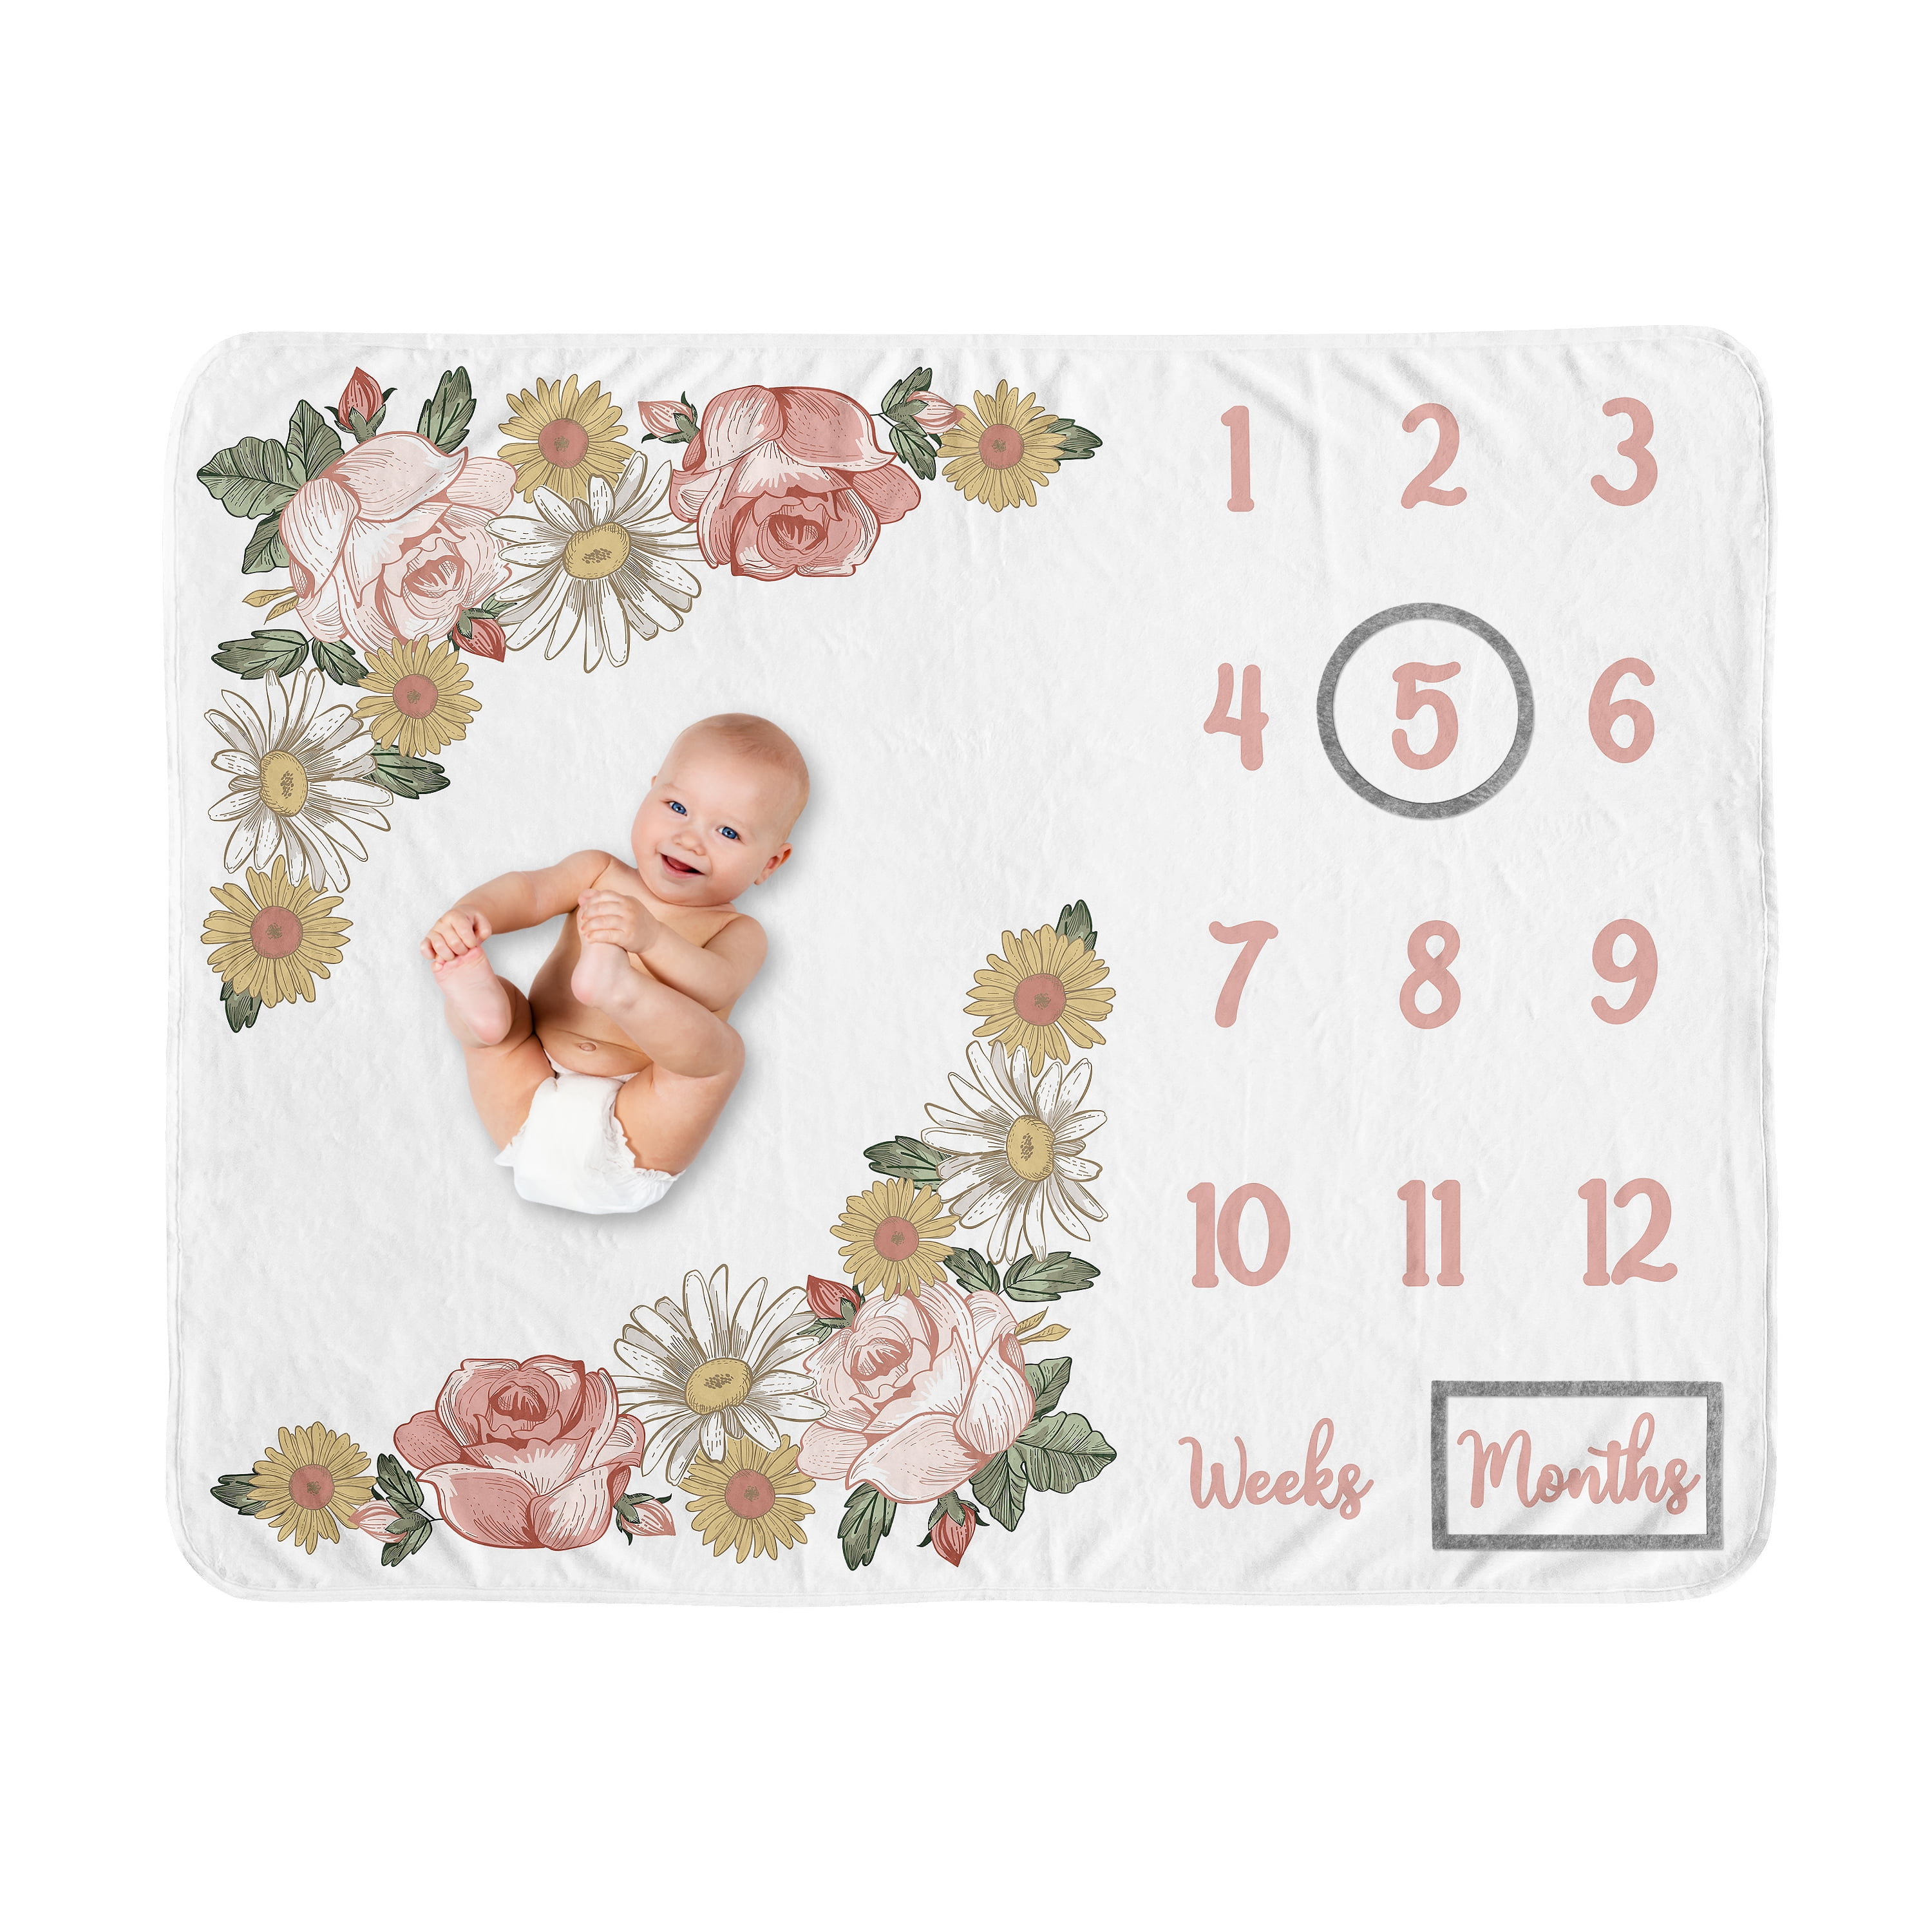 Floor Mat for Baby Age Photos Waterproof Reusable for Baby and Toddler Photography Milestone Floral Photo Prop Floor Drop